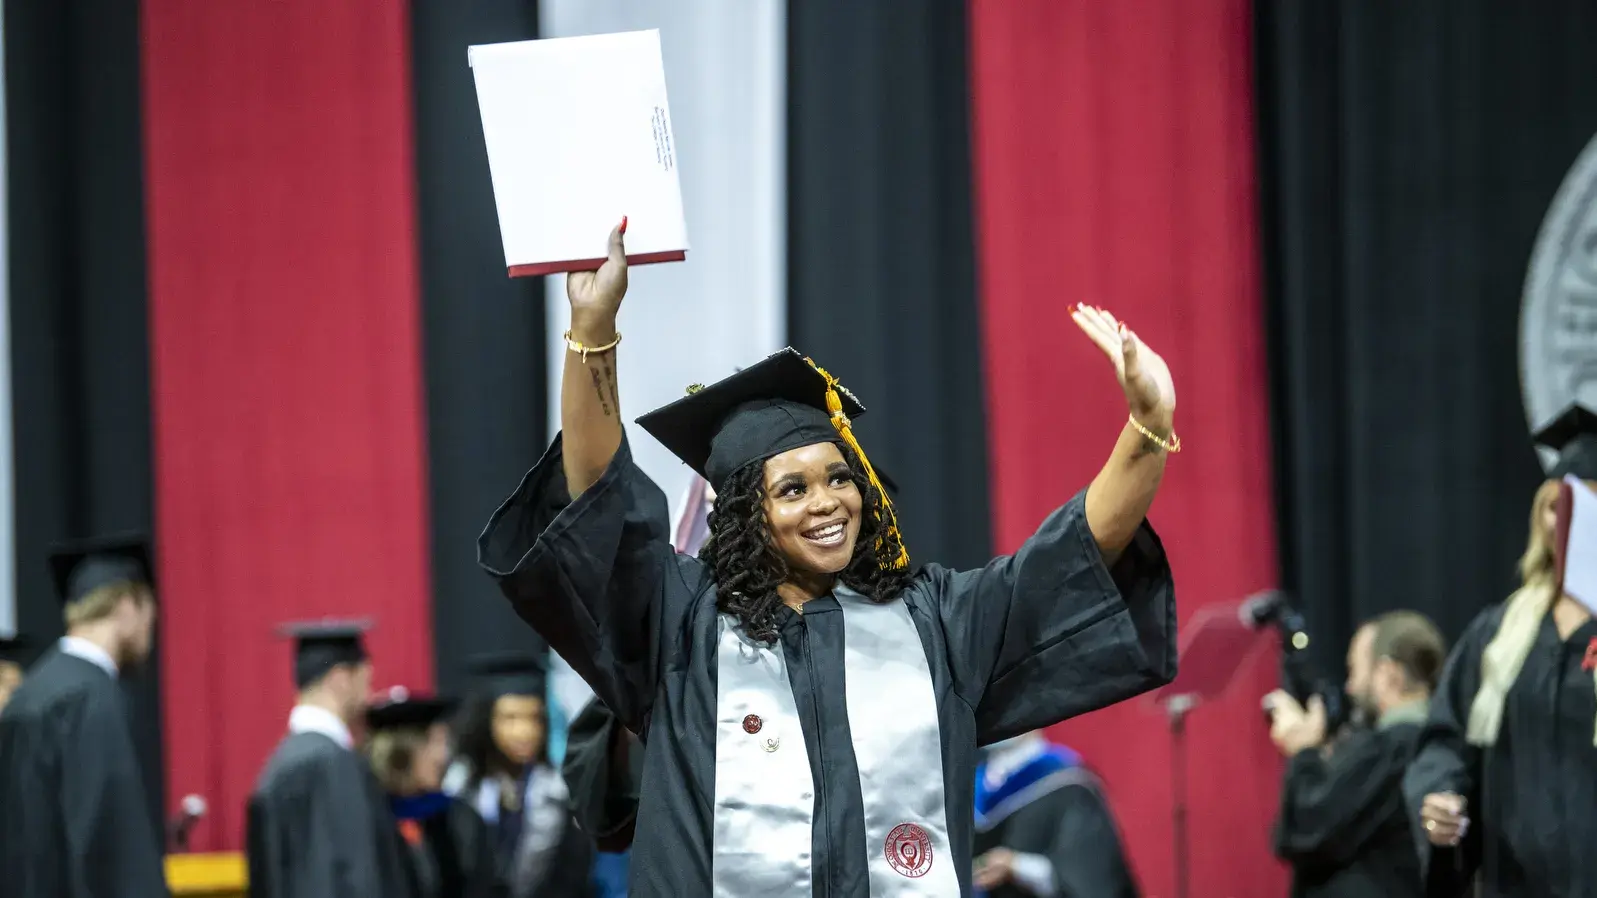 woman in graduation cap and gown waves to the audience after receiving her diploma